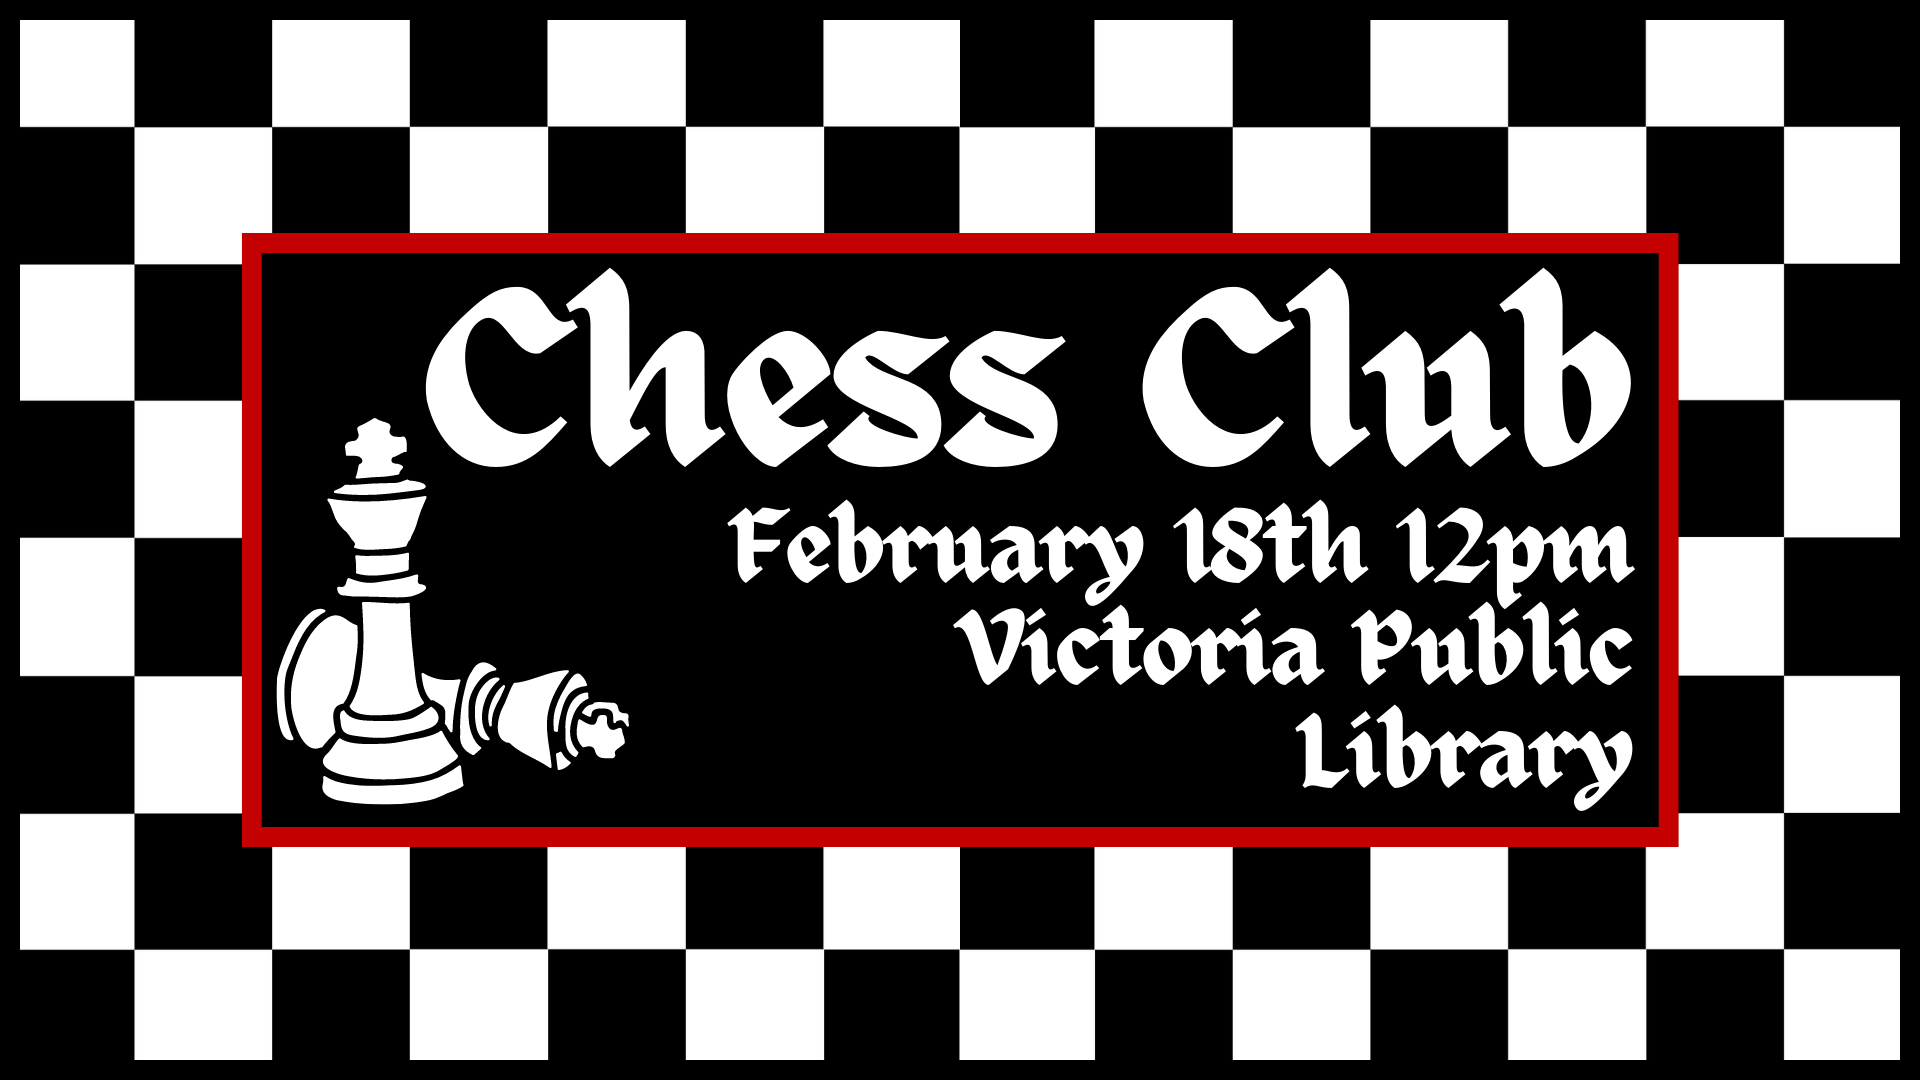 Chess club, February 18th at 12pm